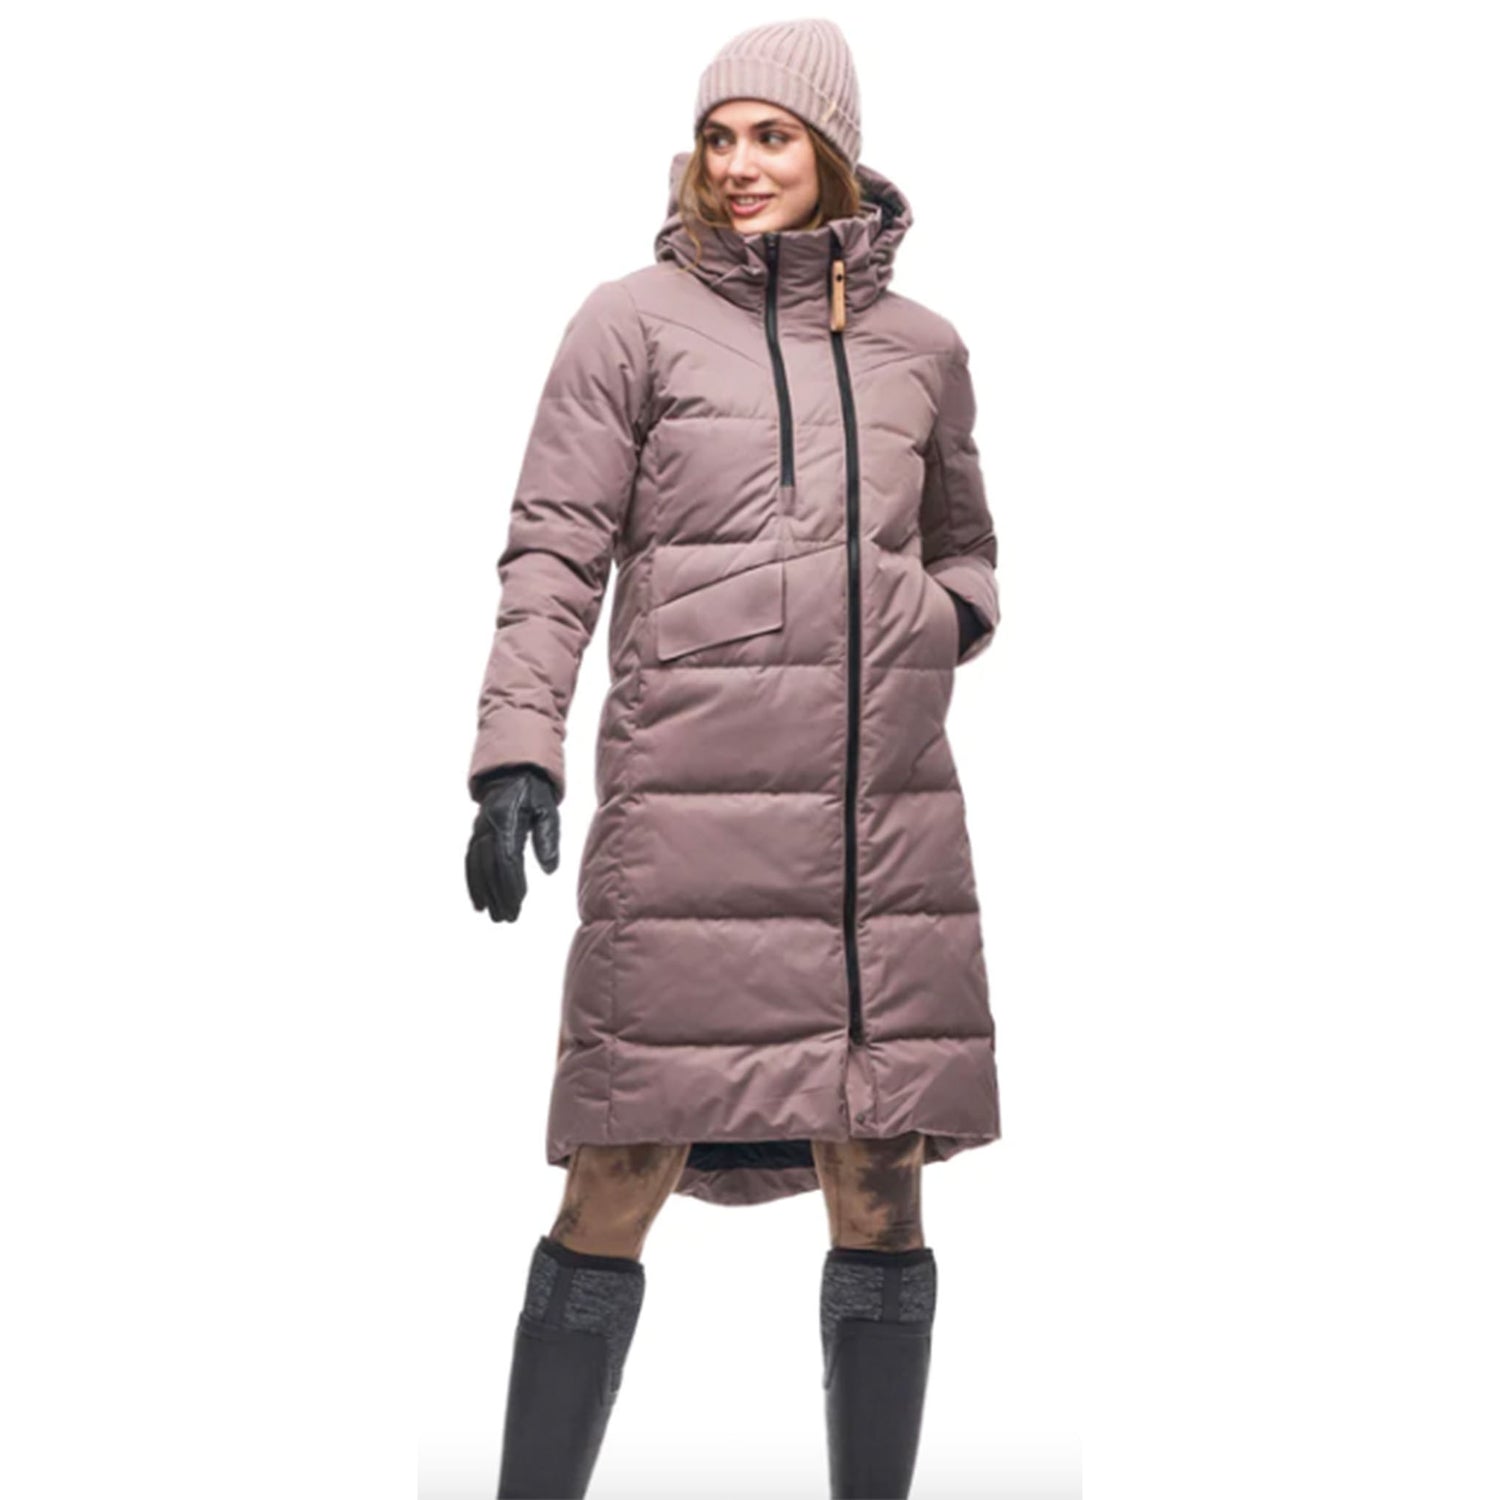 Indyeva Maco Quilted Down Blend Parka in Peppercorn front view